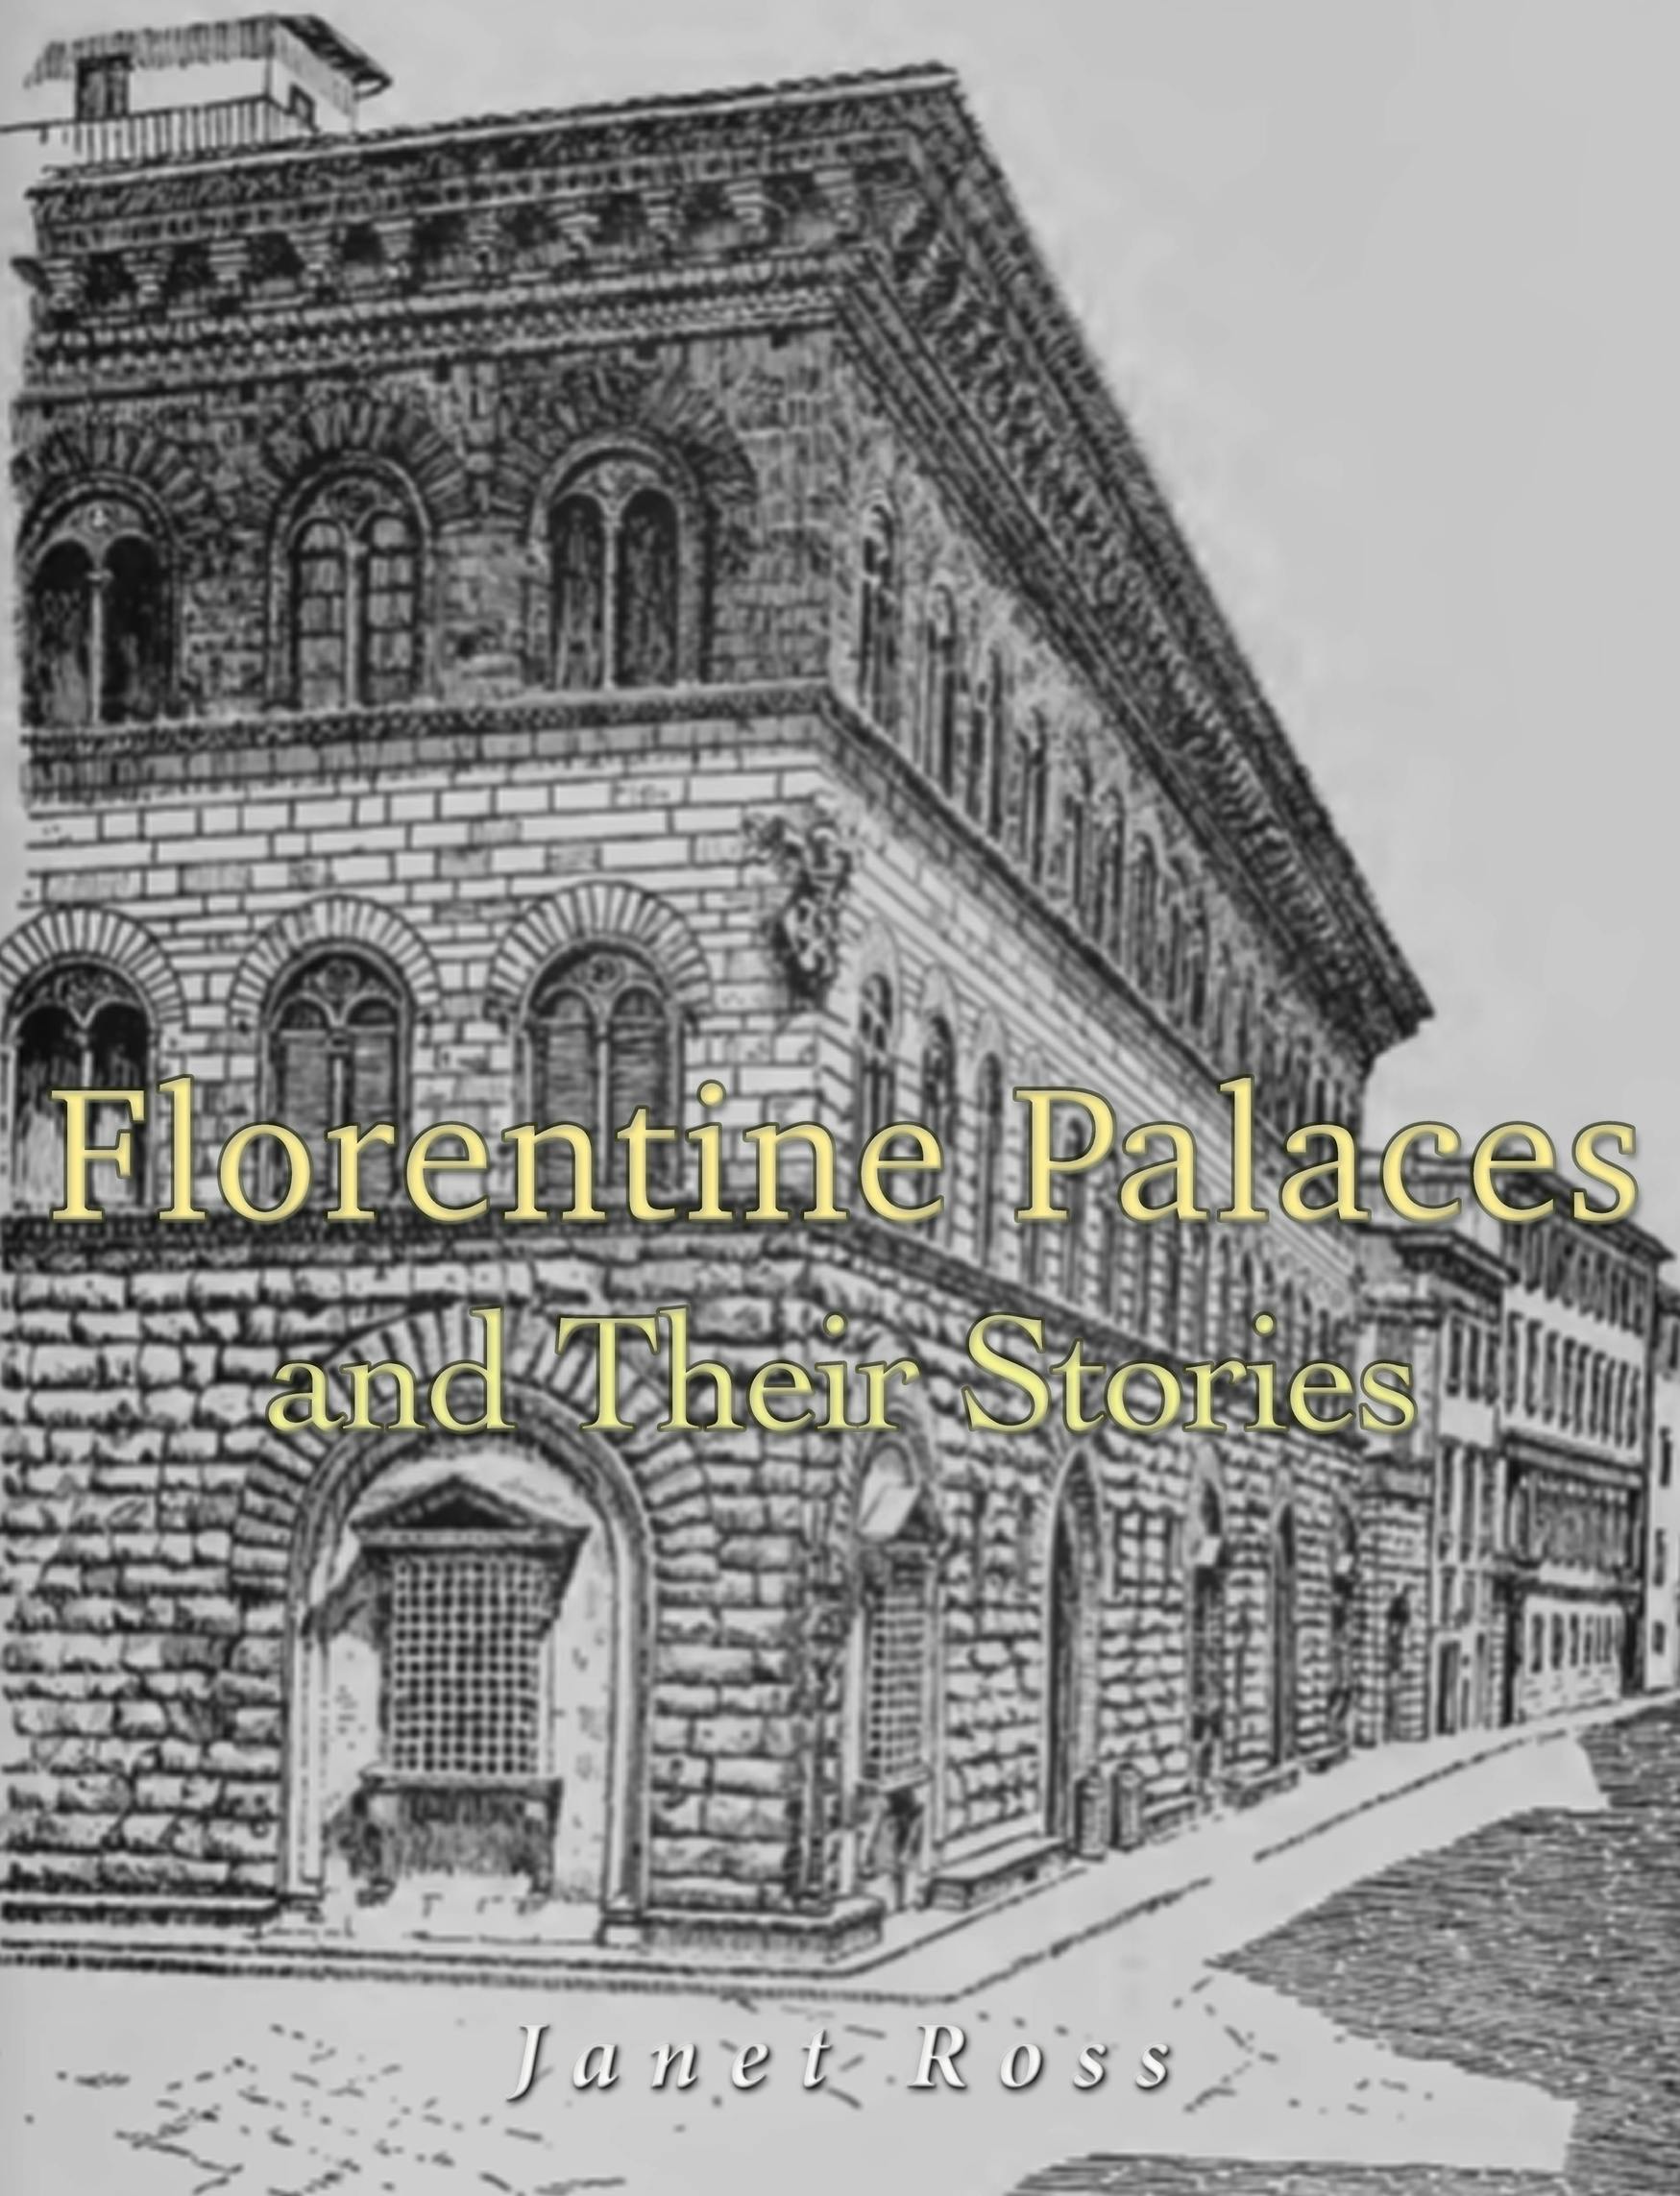 Florentine Palaces and Their Stories - Janet Ross